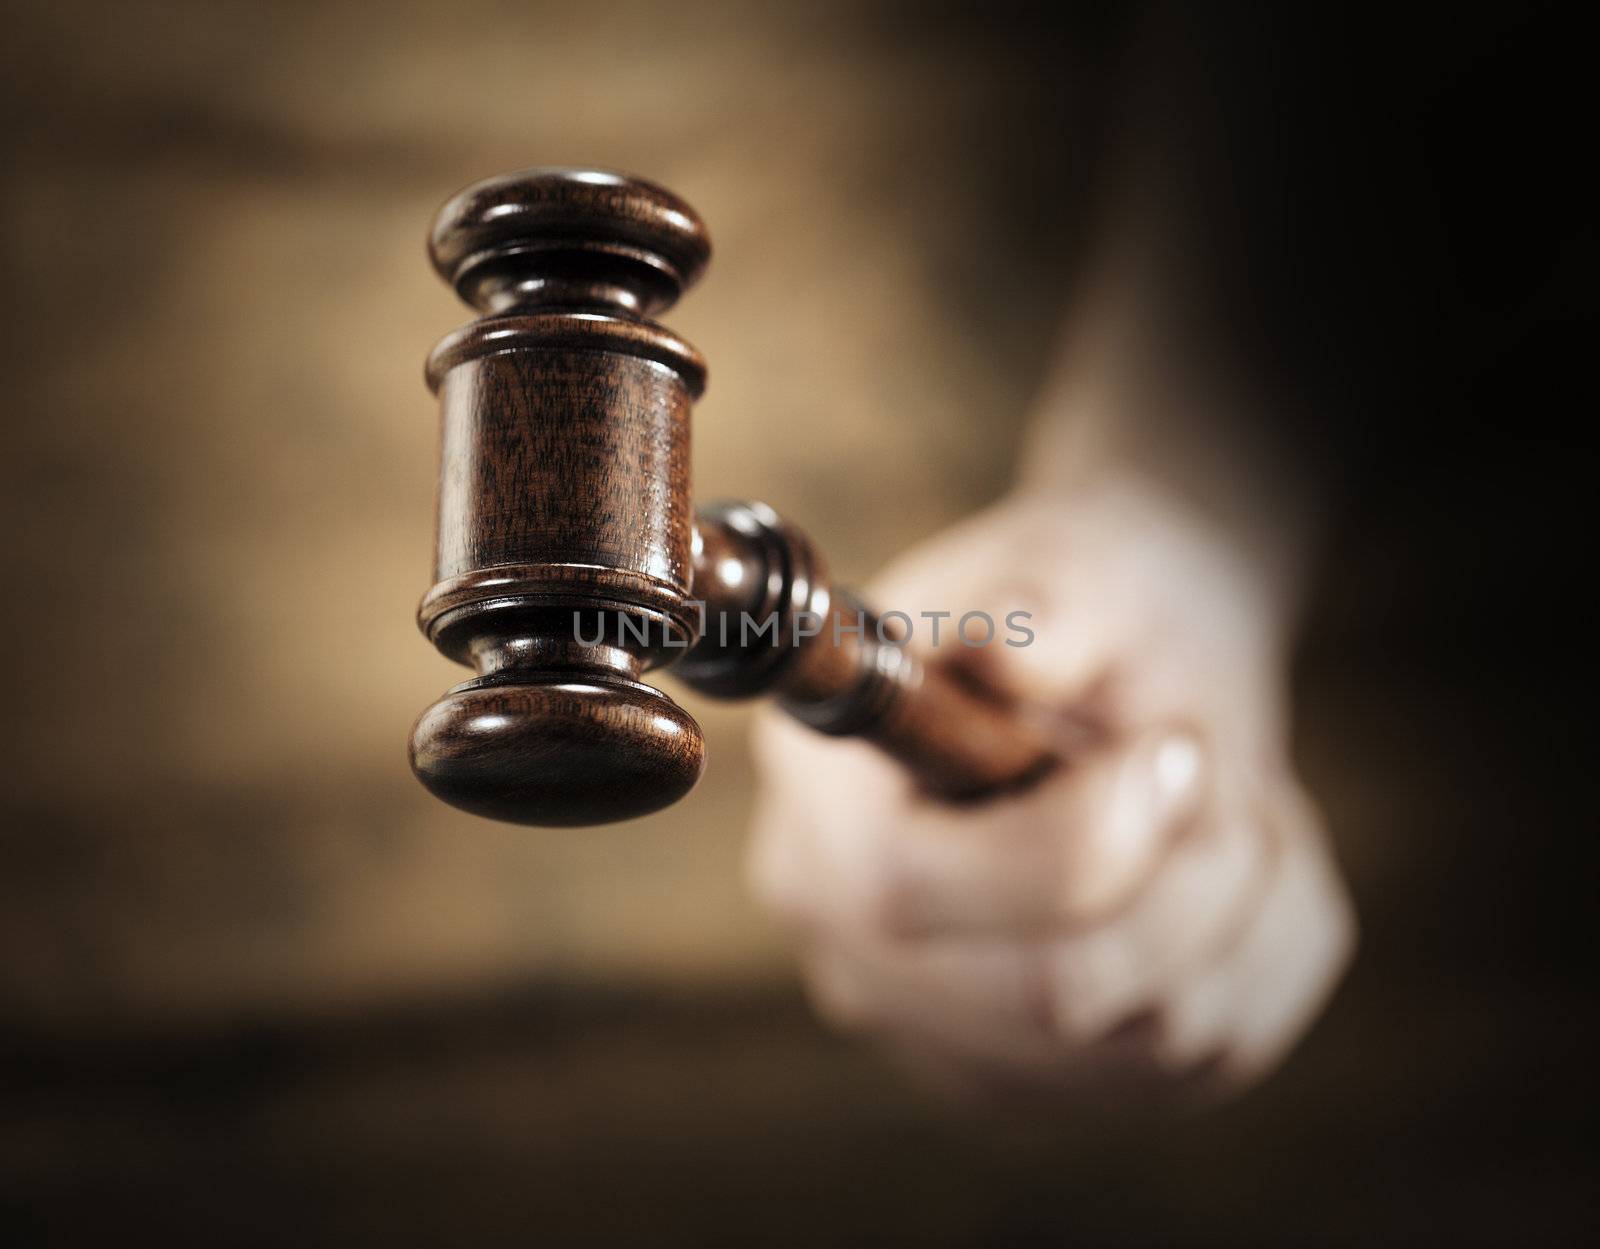 A high quality mahogany wooden gavel. Very short depth-of-field.